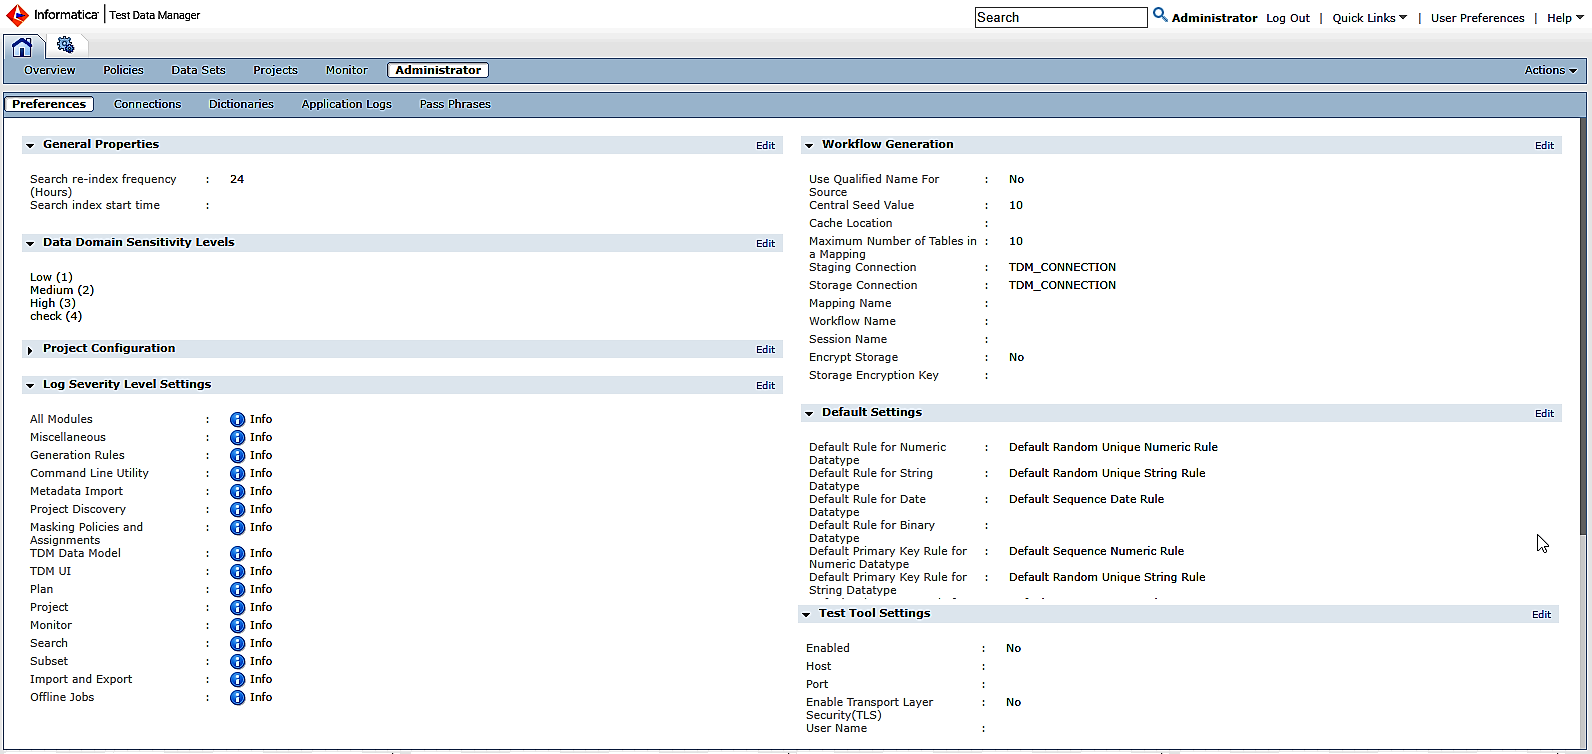 The Administrator view has the following views: the Preferences view, the Connections view, the Dictionaries view, the Application Logs view, the Pass Phrases view, and the Test Data Warehouse view. The image shows the Preferences view. The Preferences view shows the general properties, data domain sensitivity levels, project configuration, workflow generation, log severity level settings, data generation default settings, and test tool settings. 
			 